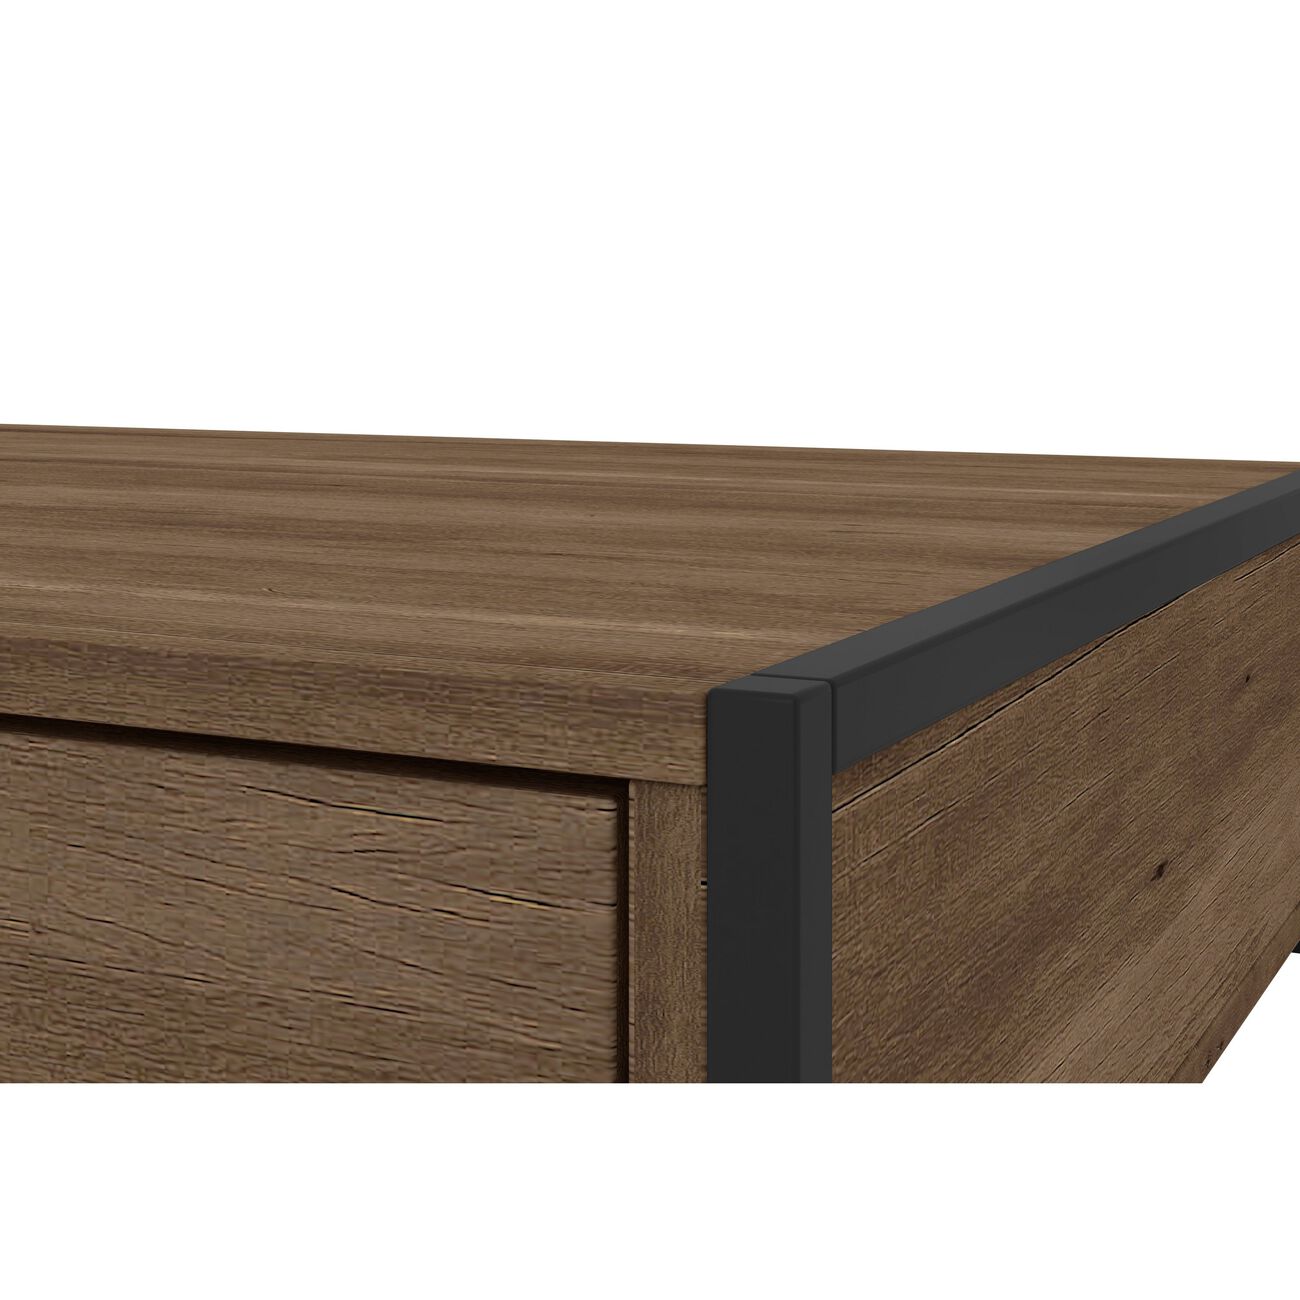 Wood and Metal Rectangular Coffee Table with Drawer and  Shelf, Brown and Black